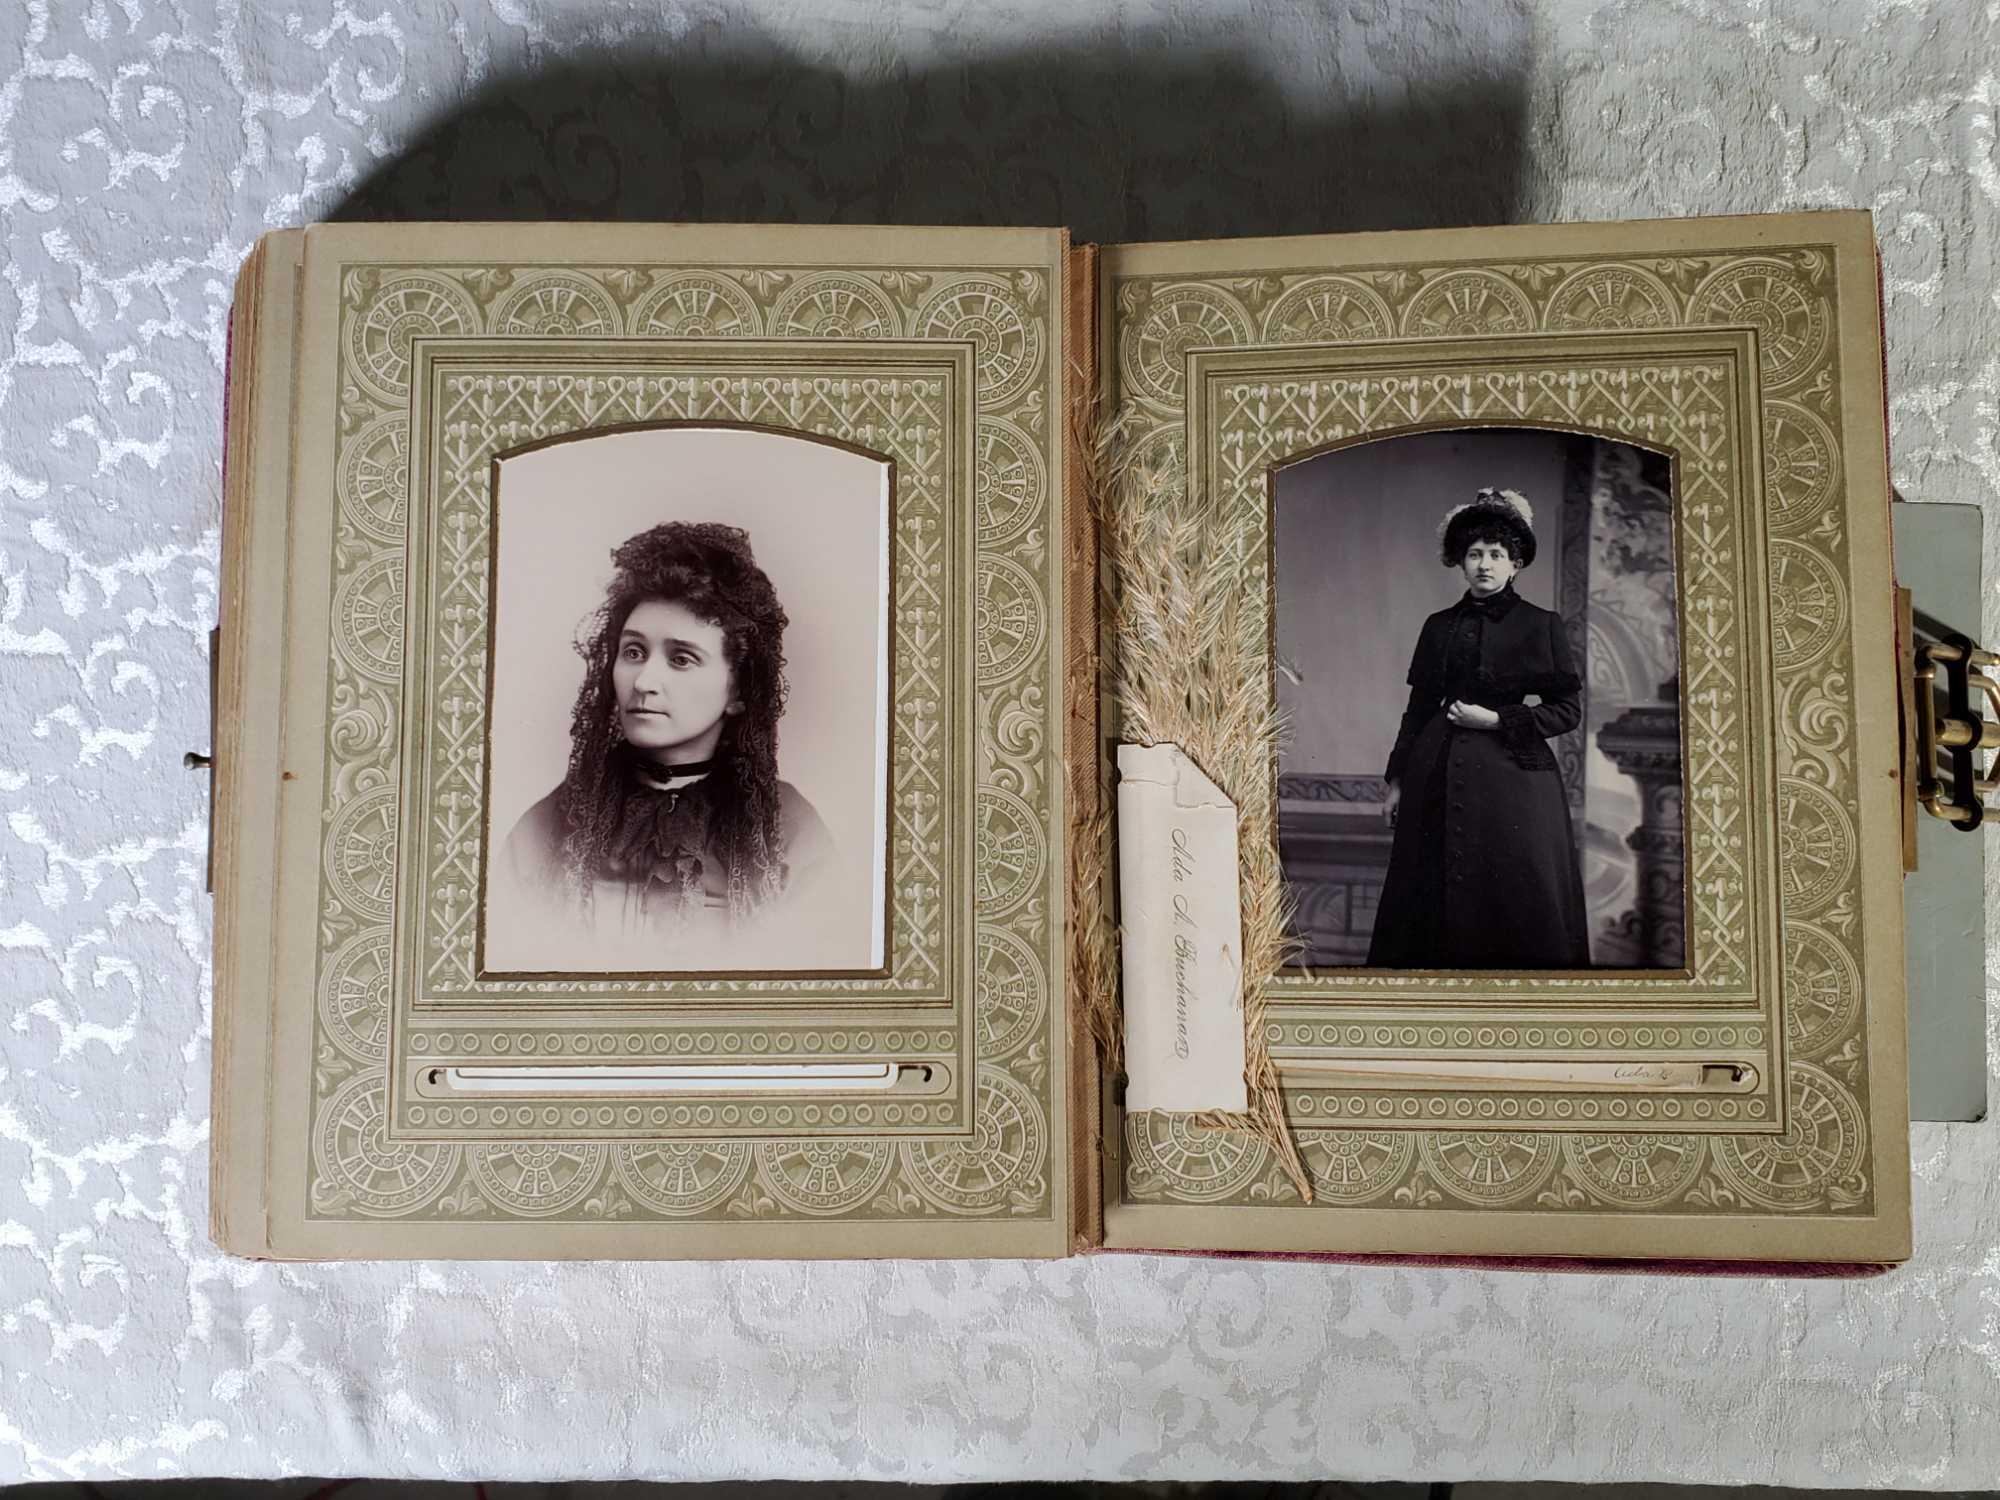 Lot Of Great Vintage Photos Cabinet Cards, Cartes des Visites, Victorian Album, And Tool Box